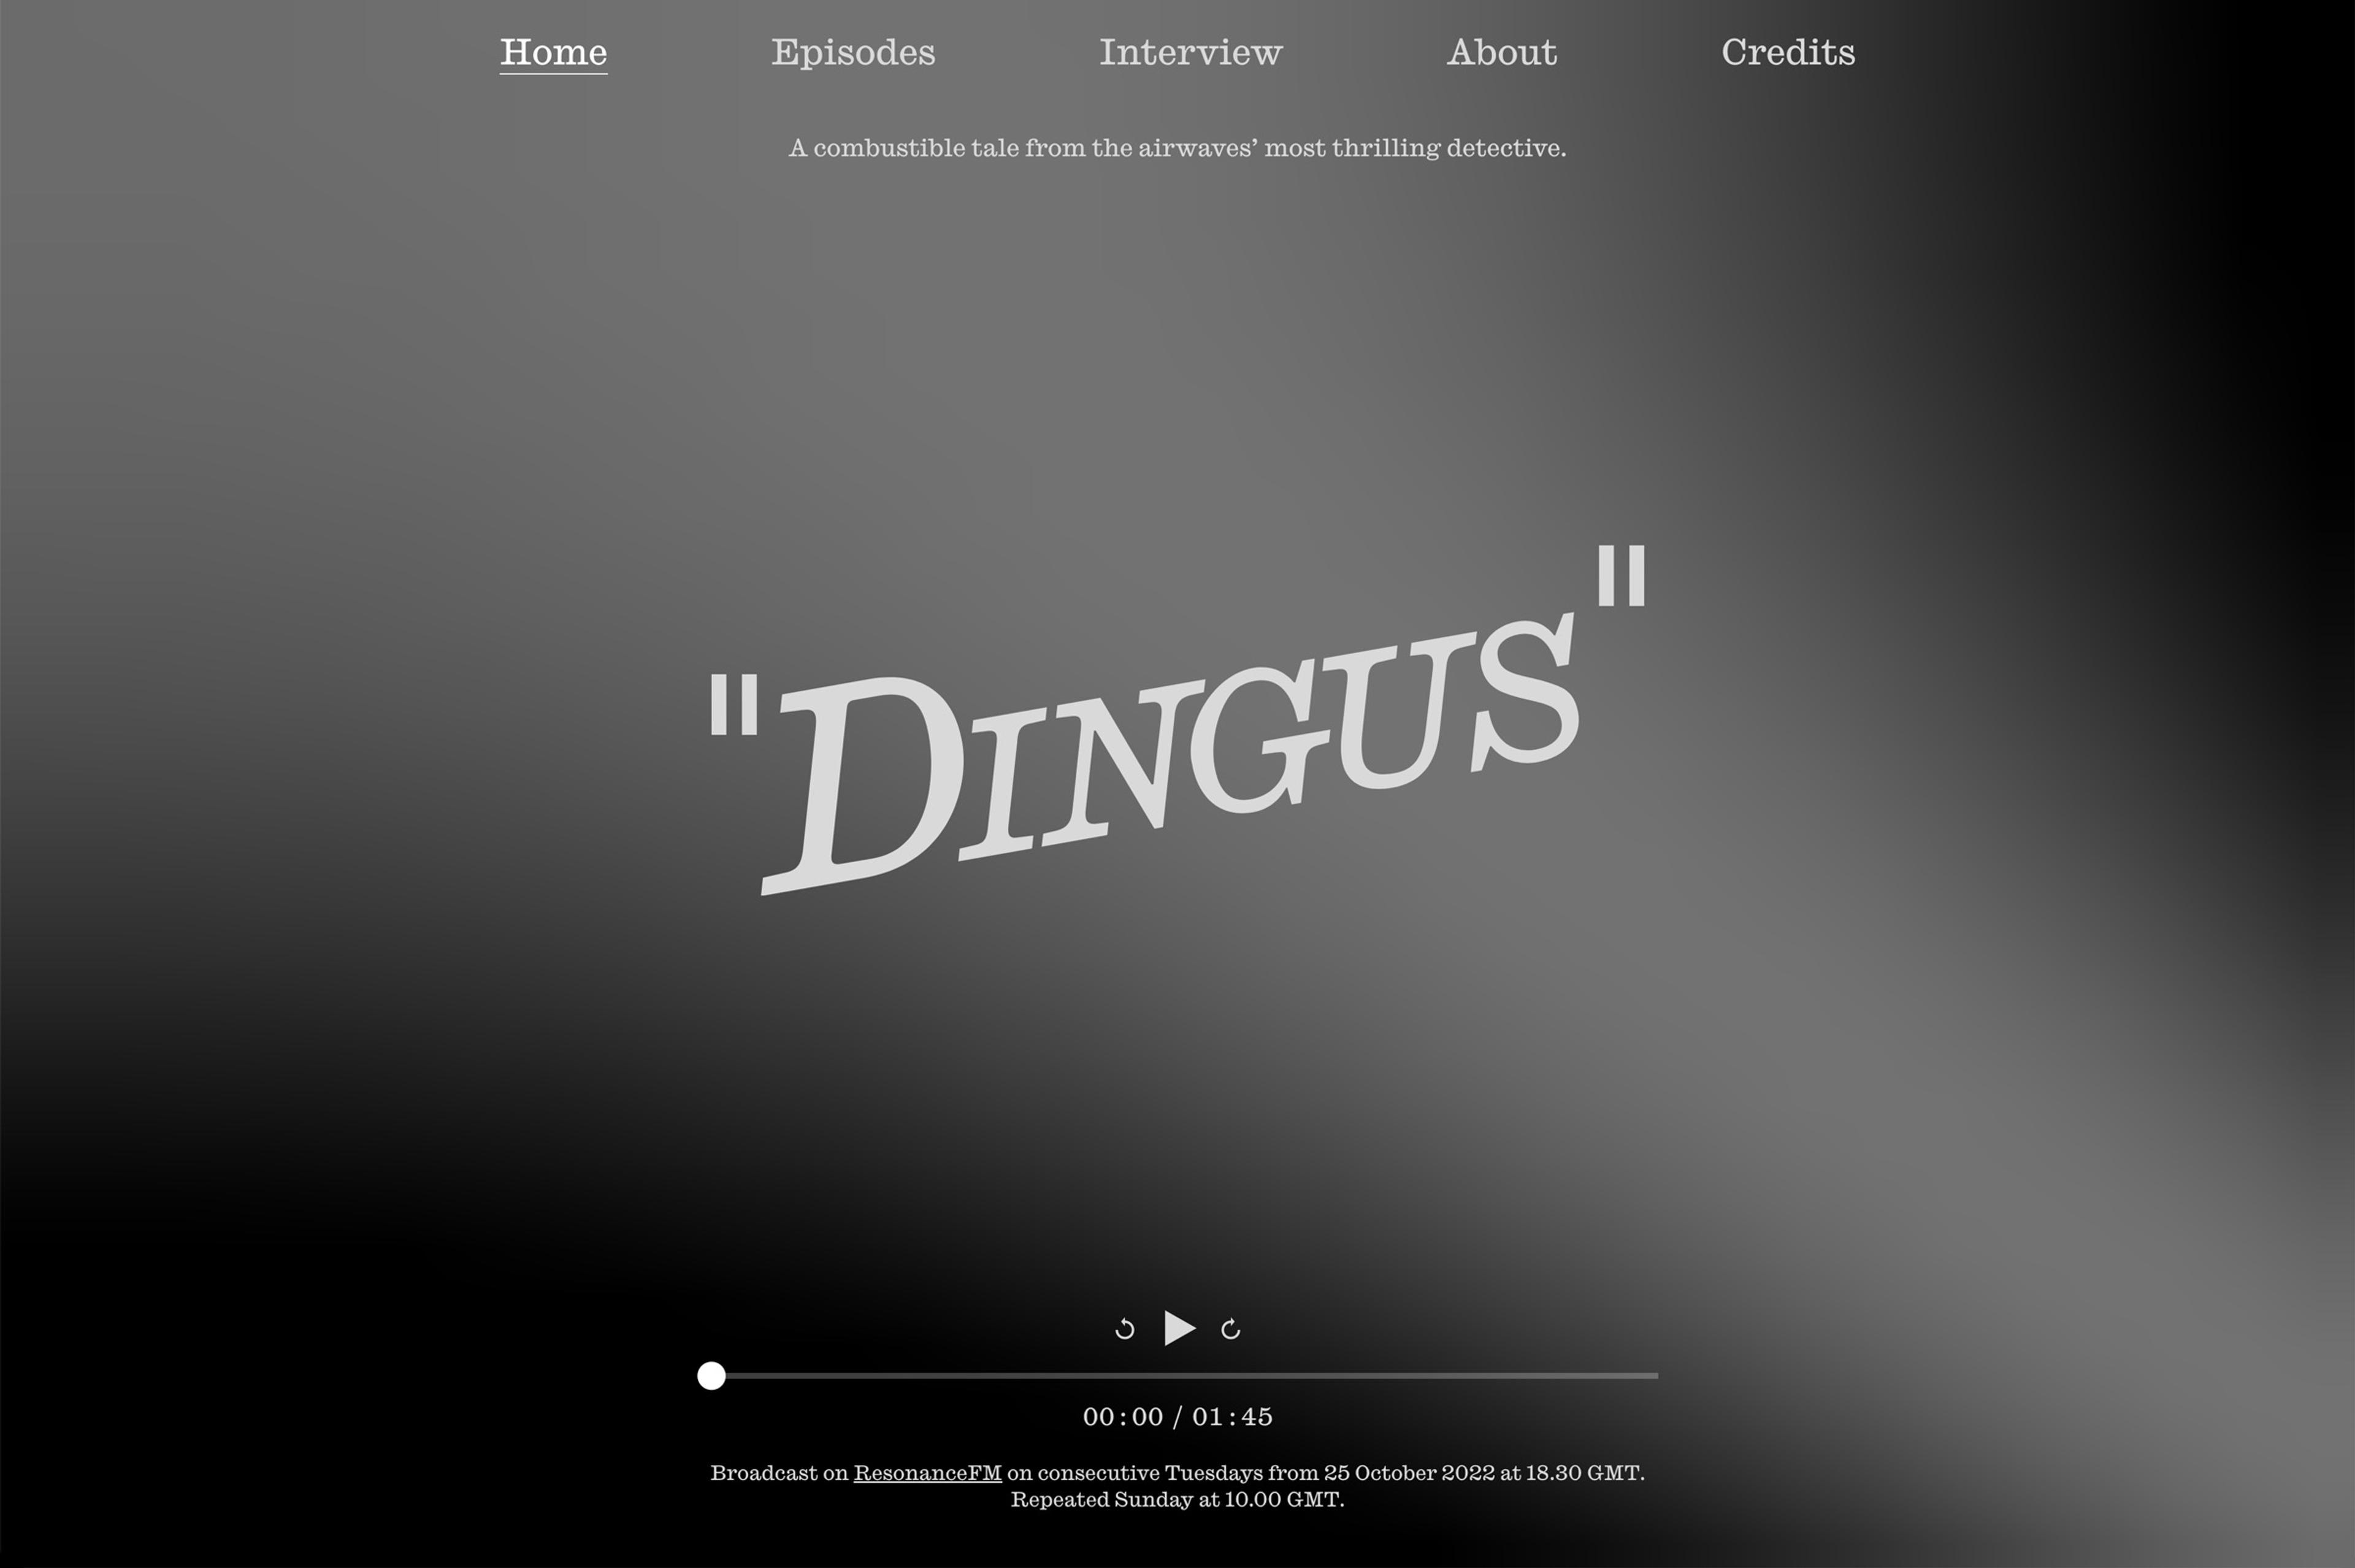 A screengrab from the Dingus homepage. The title 'Dingus' is set in white uppercase letters at an upwards angle on a smokey grey-black background